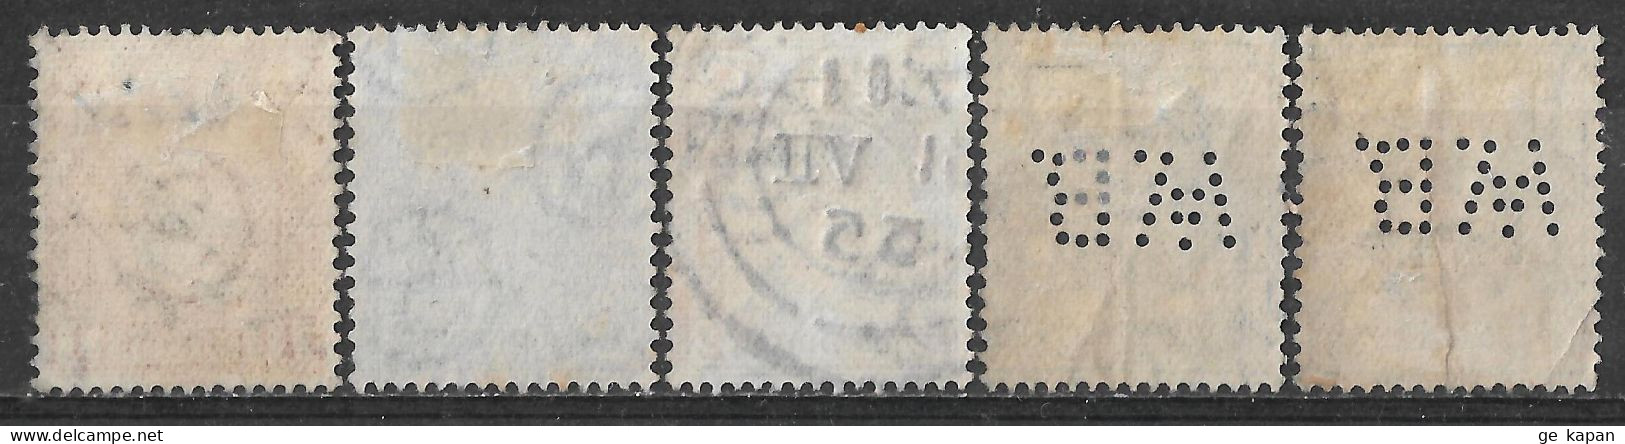 1922-1923 IRELAND SET OF 5 USED STAMPS (Michel # 41A,43A,45A) CV €5.30 - Gebraucht